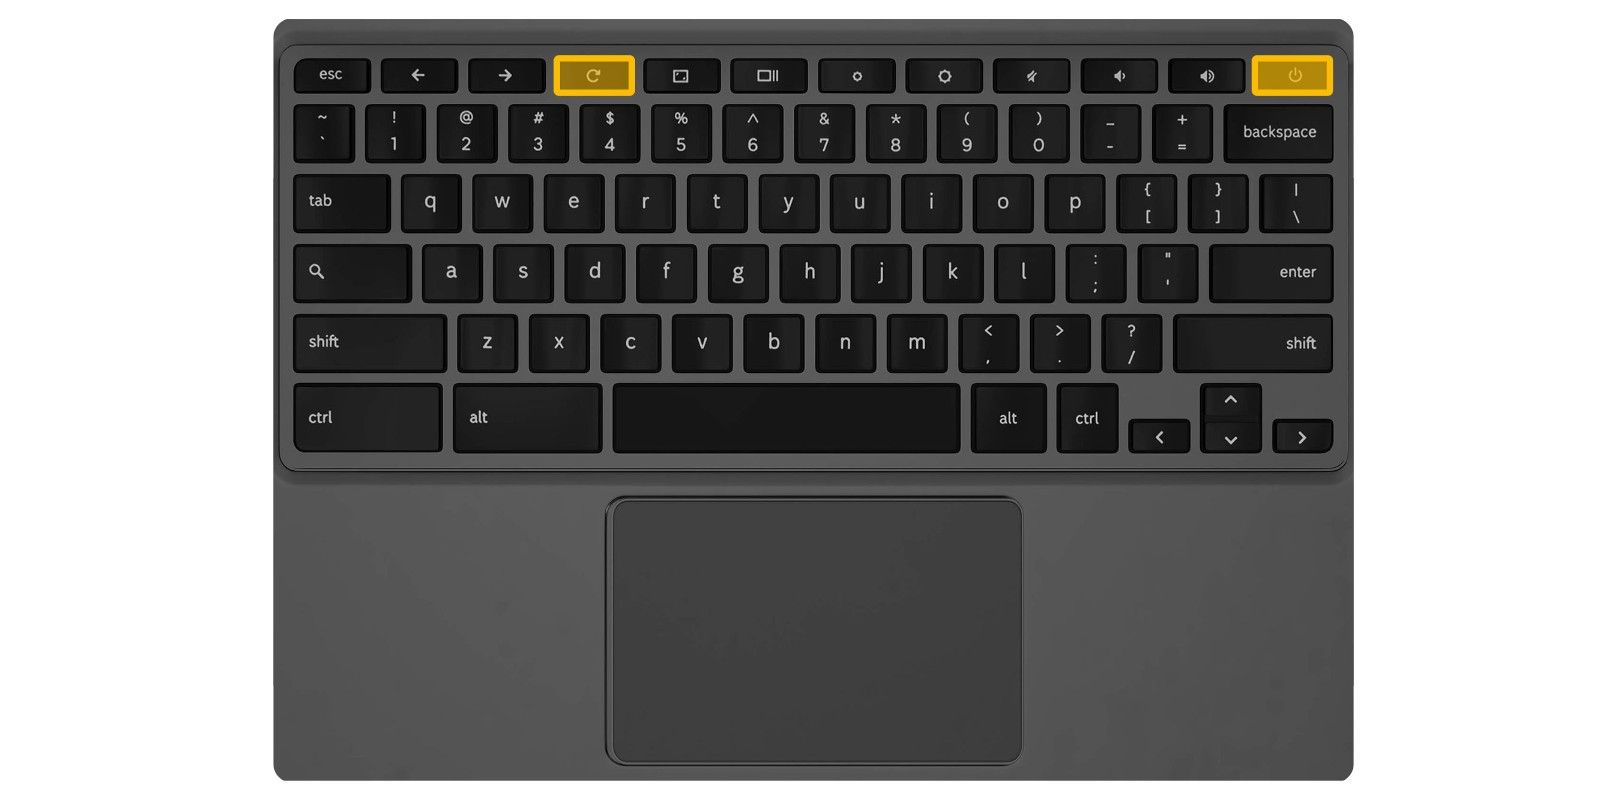 Chromebooks with a keyboard have a reset key.